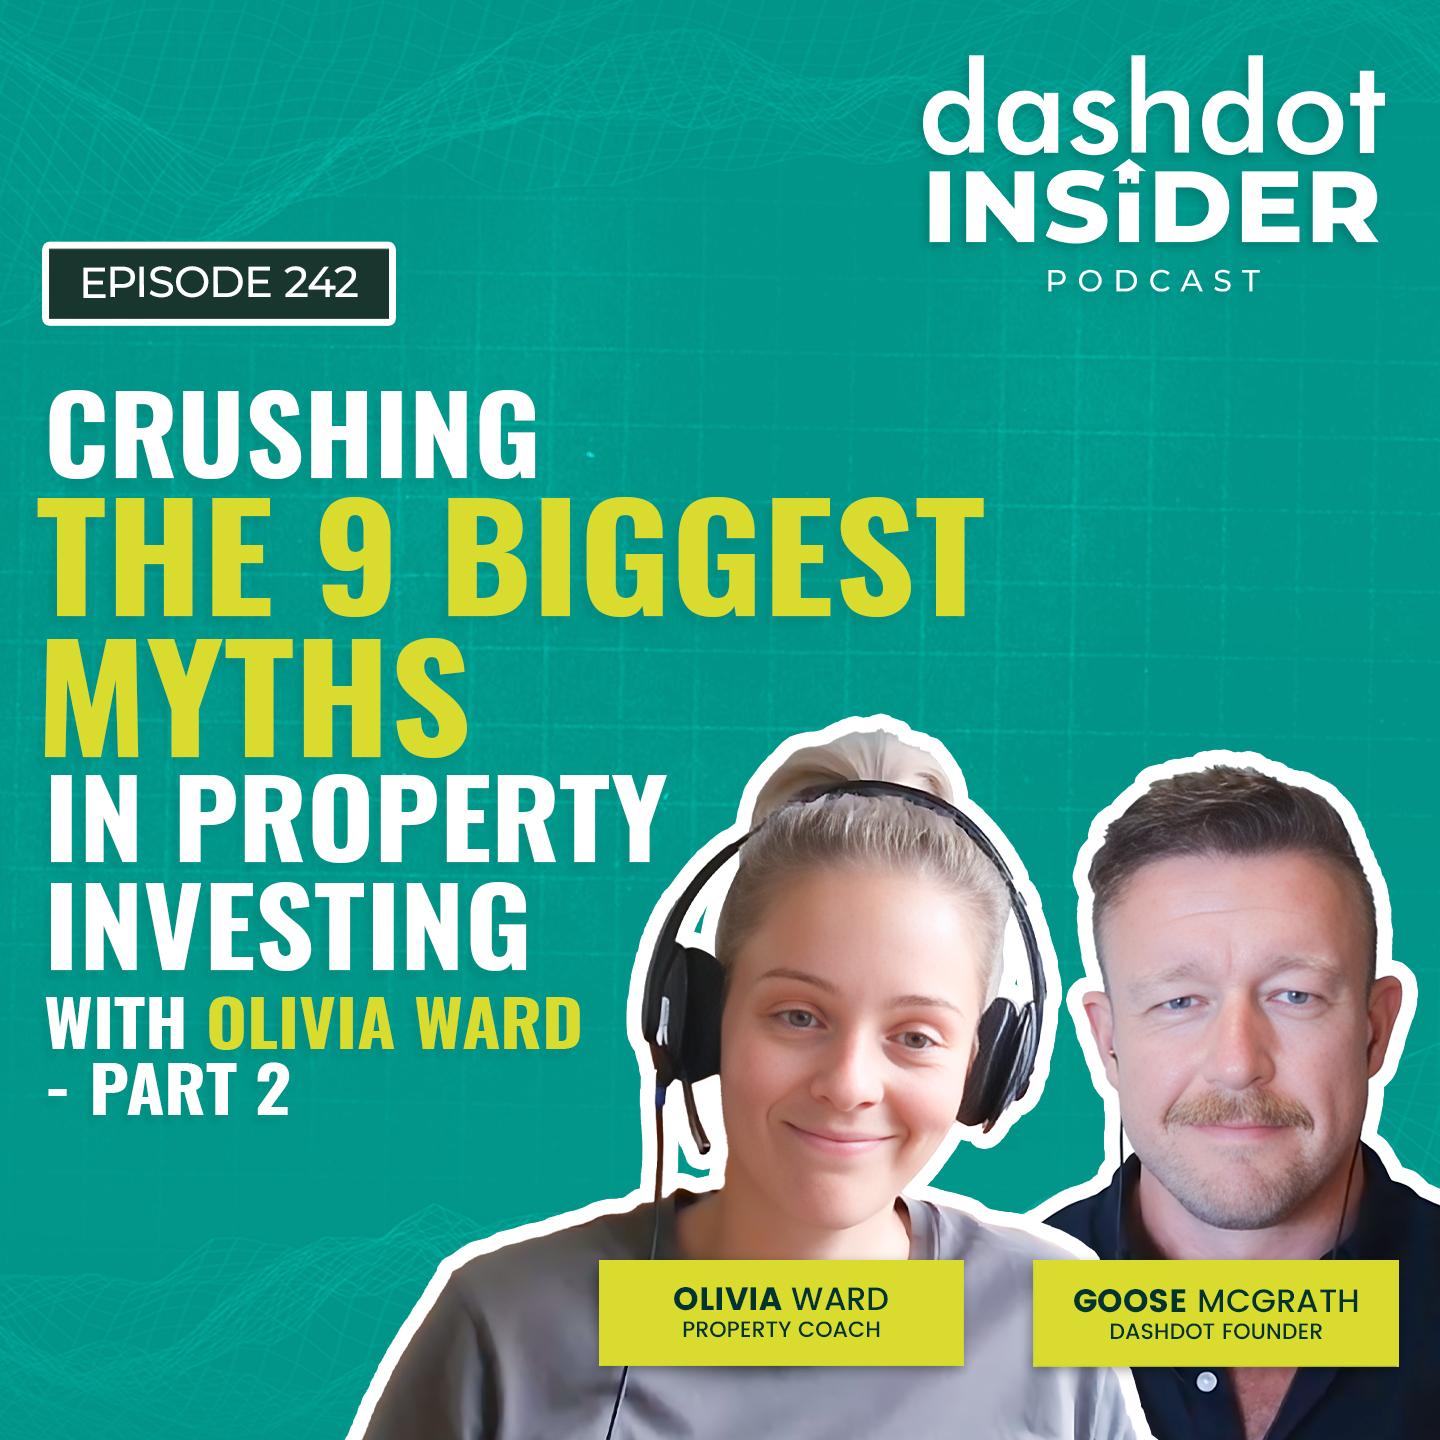 Crushing the 9 Biggest Myths in Property Investing with Olivia Ward - Part 2 | #242